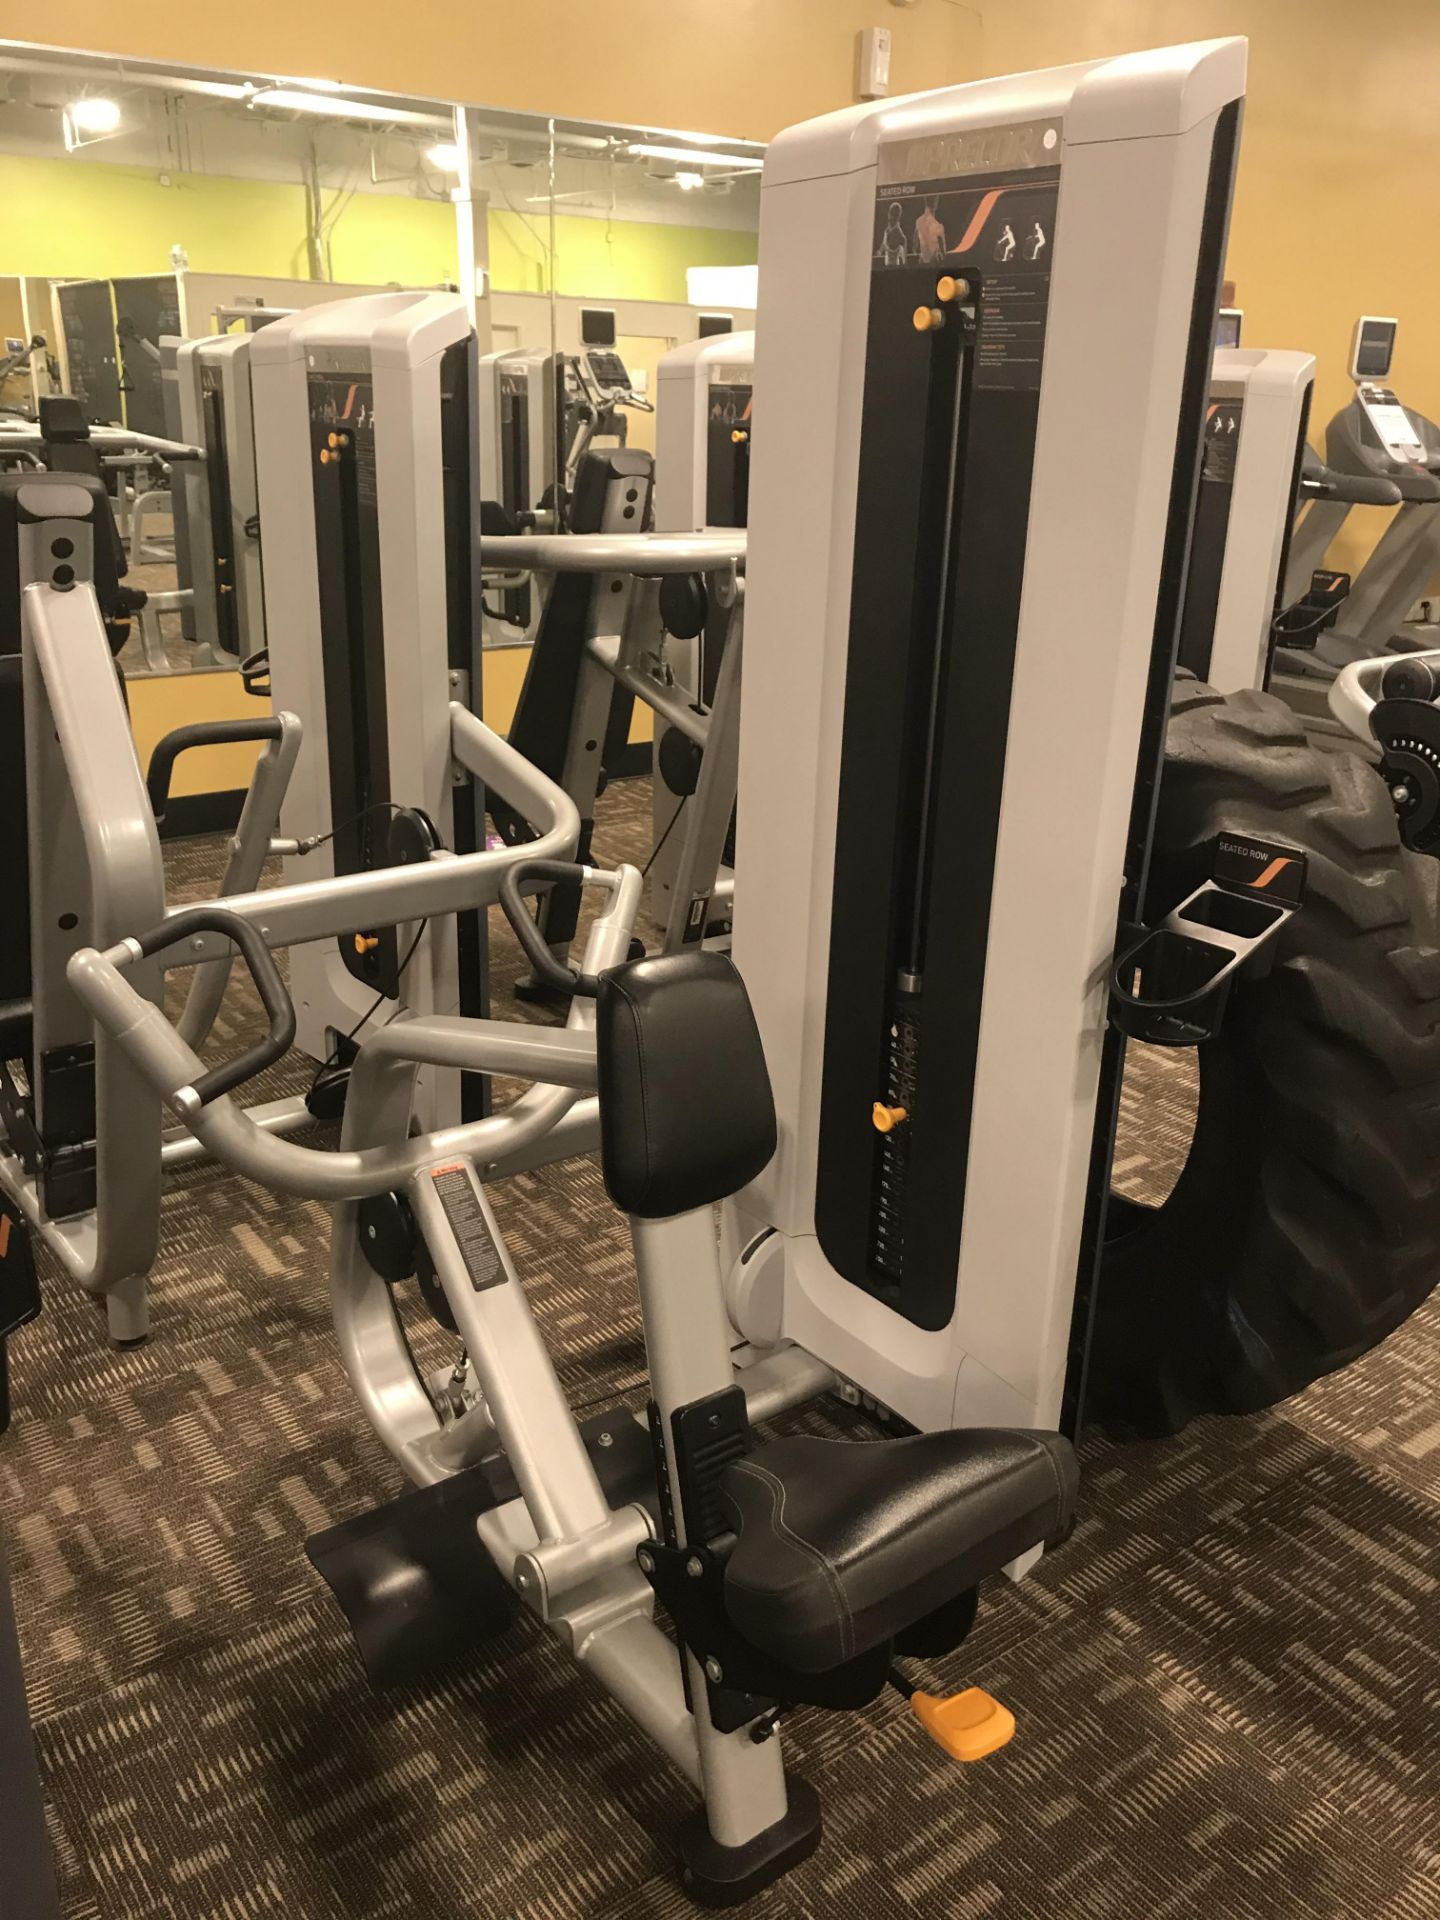 Precor C Line Seated Row #BWJMA15090001 w/250lb. Weight Stack & Adjustable Seat (WYOMING, RI